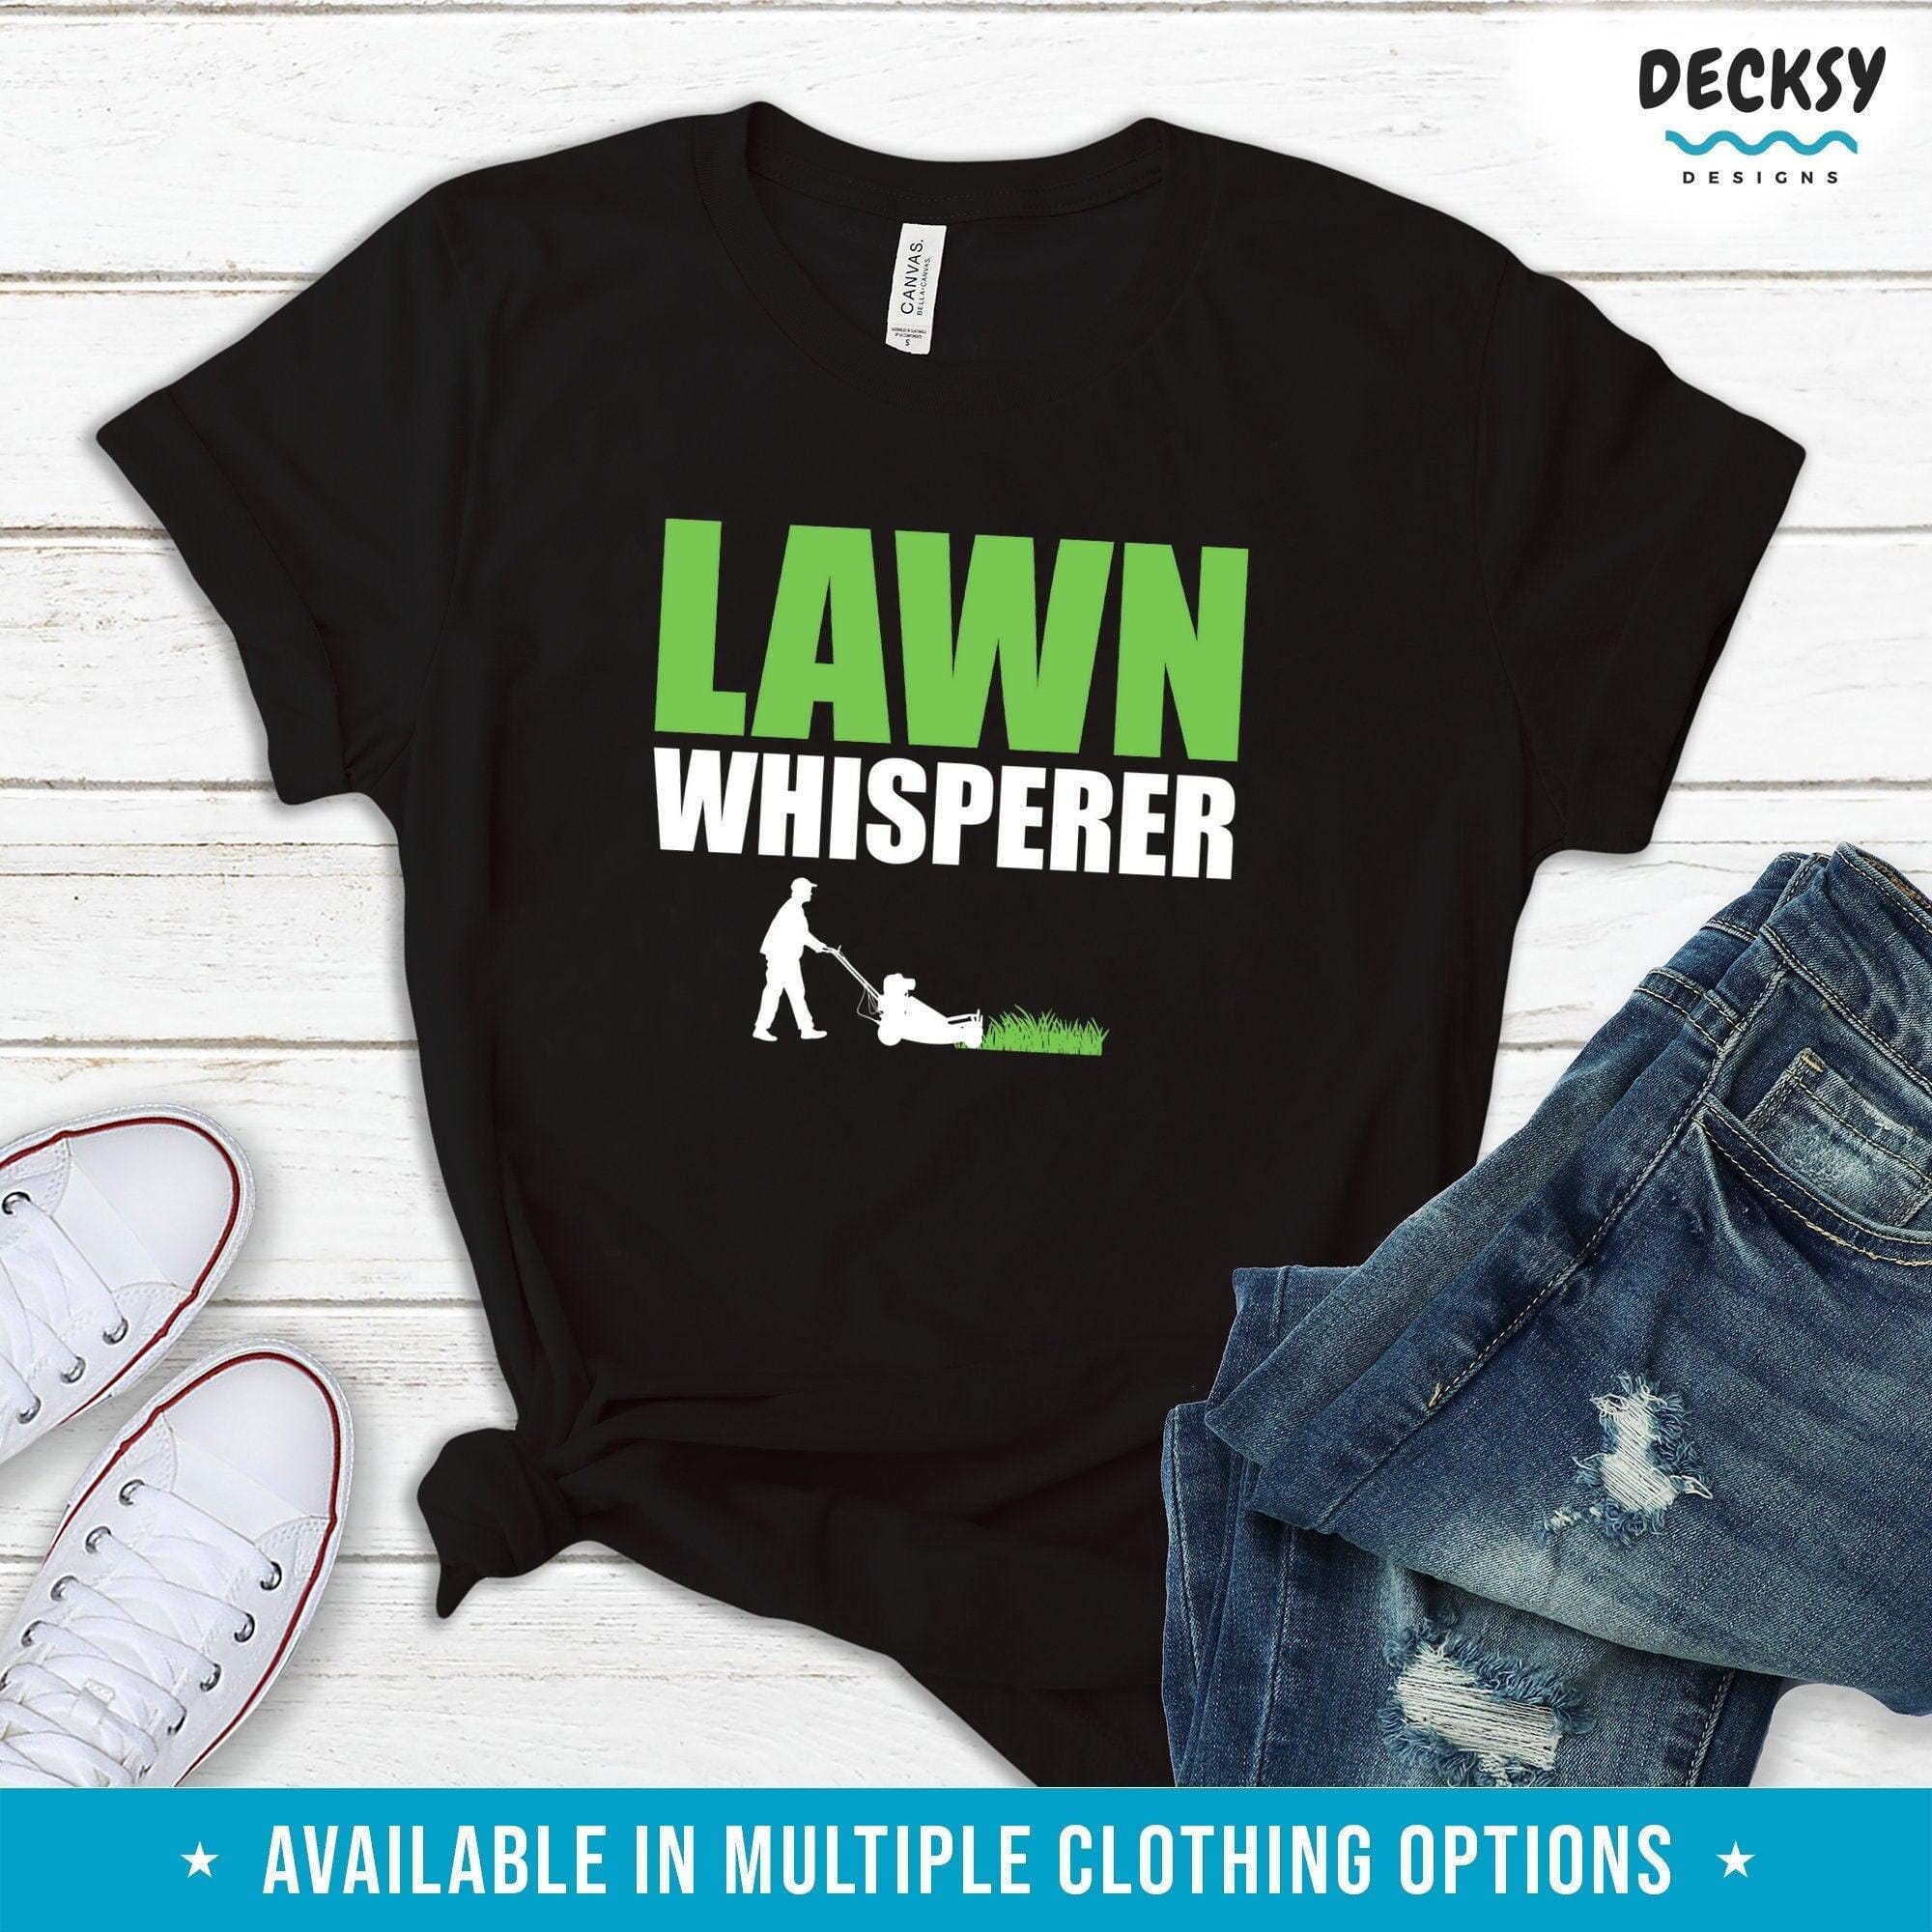 Lawn Mowing T Shirt, Mower Gift-Clothing:Gender-Neutral Adult Clothing:Tops & Tees:T-shirts:Graphic Tees-DecksyDesigns